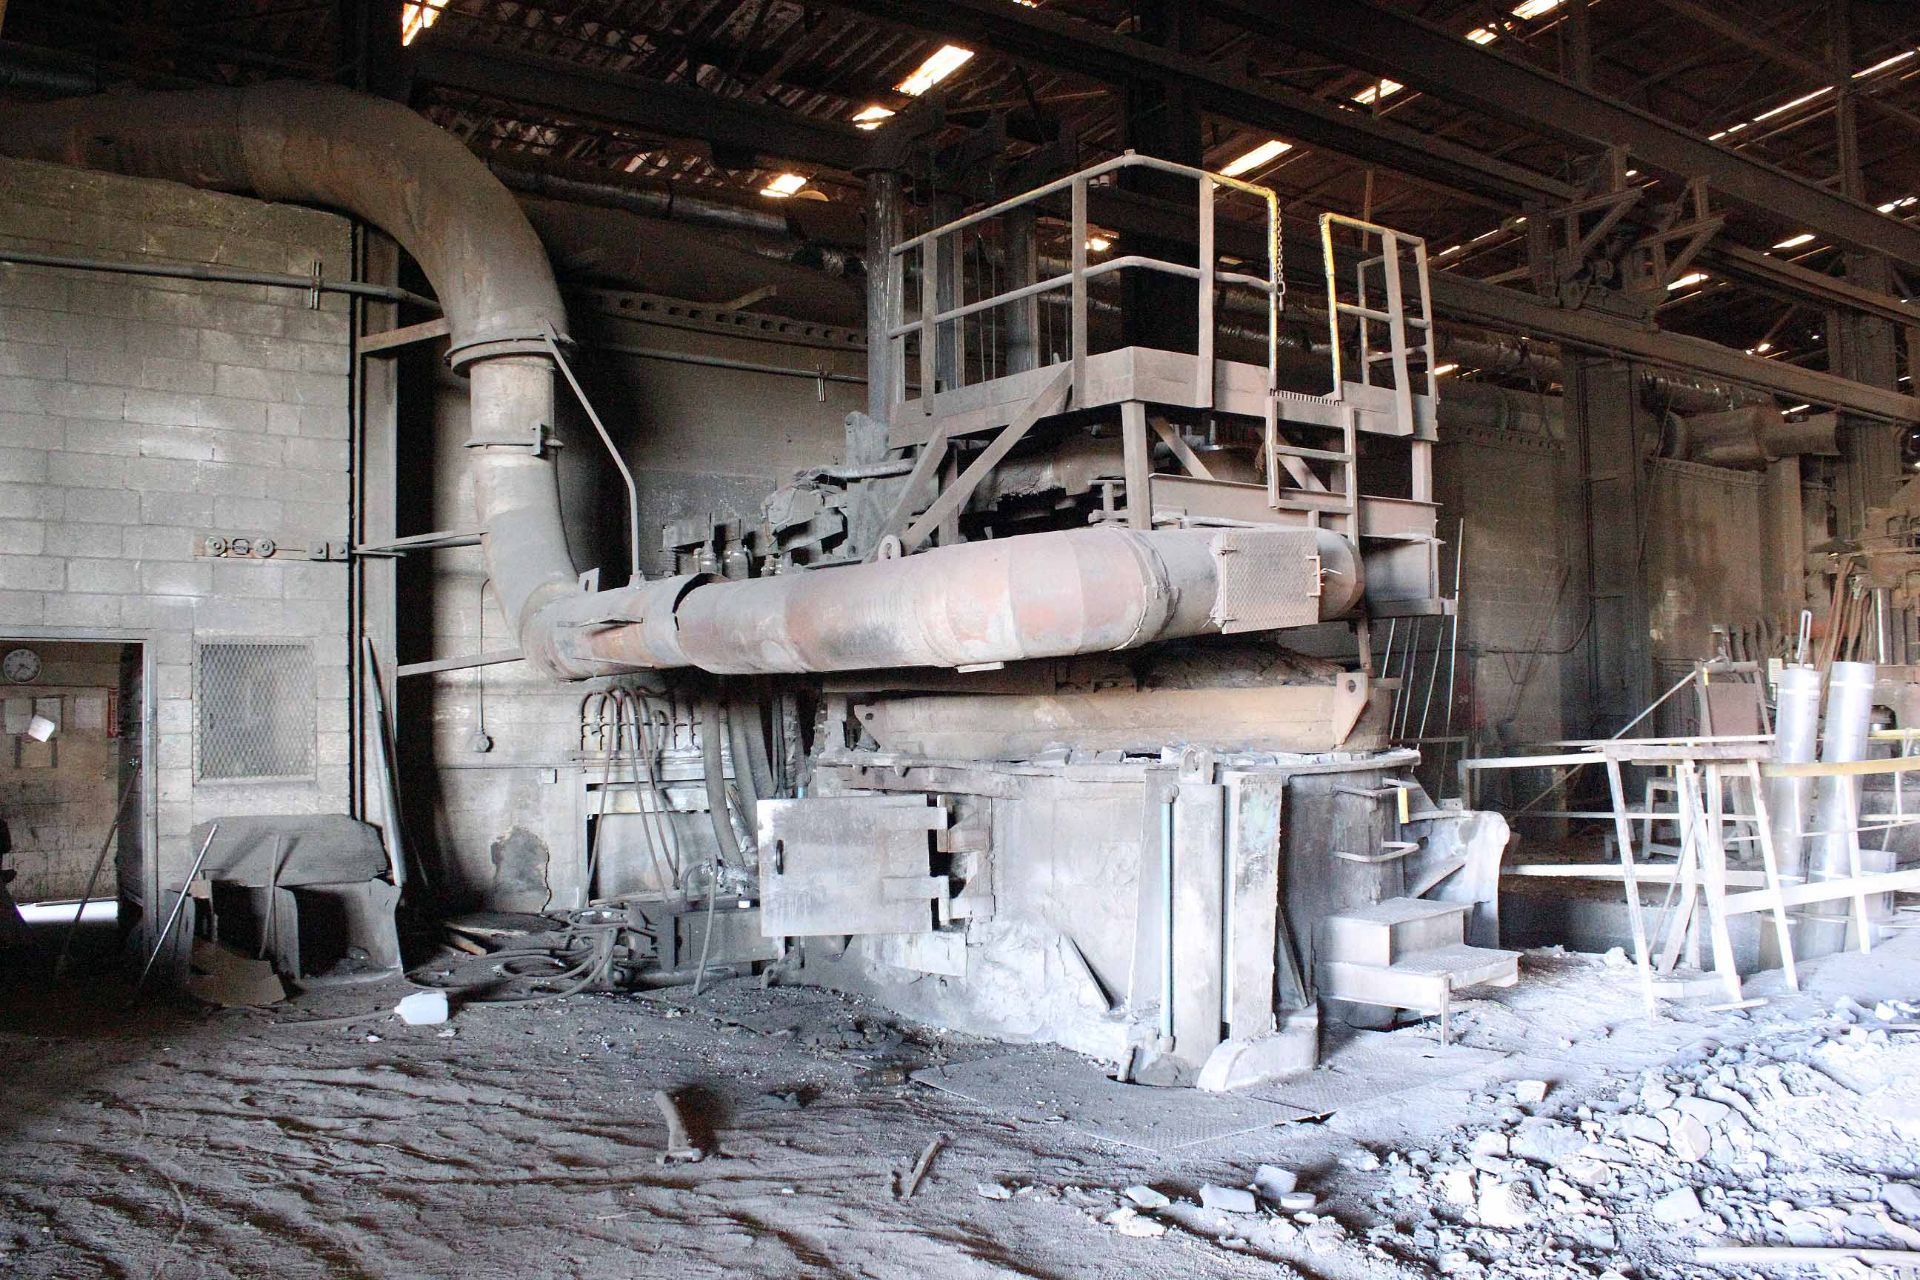 ELECTRIC ARC FURNACE, LECTROMELT 8 T. CAP., hyd. tilting shell, hyd. assist lid, water cooled leads, - Image 5 of 7